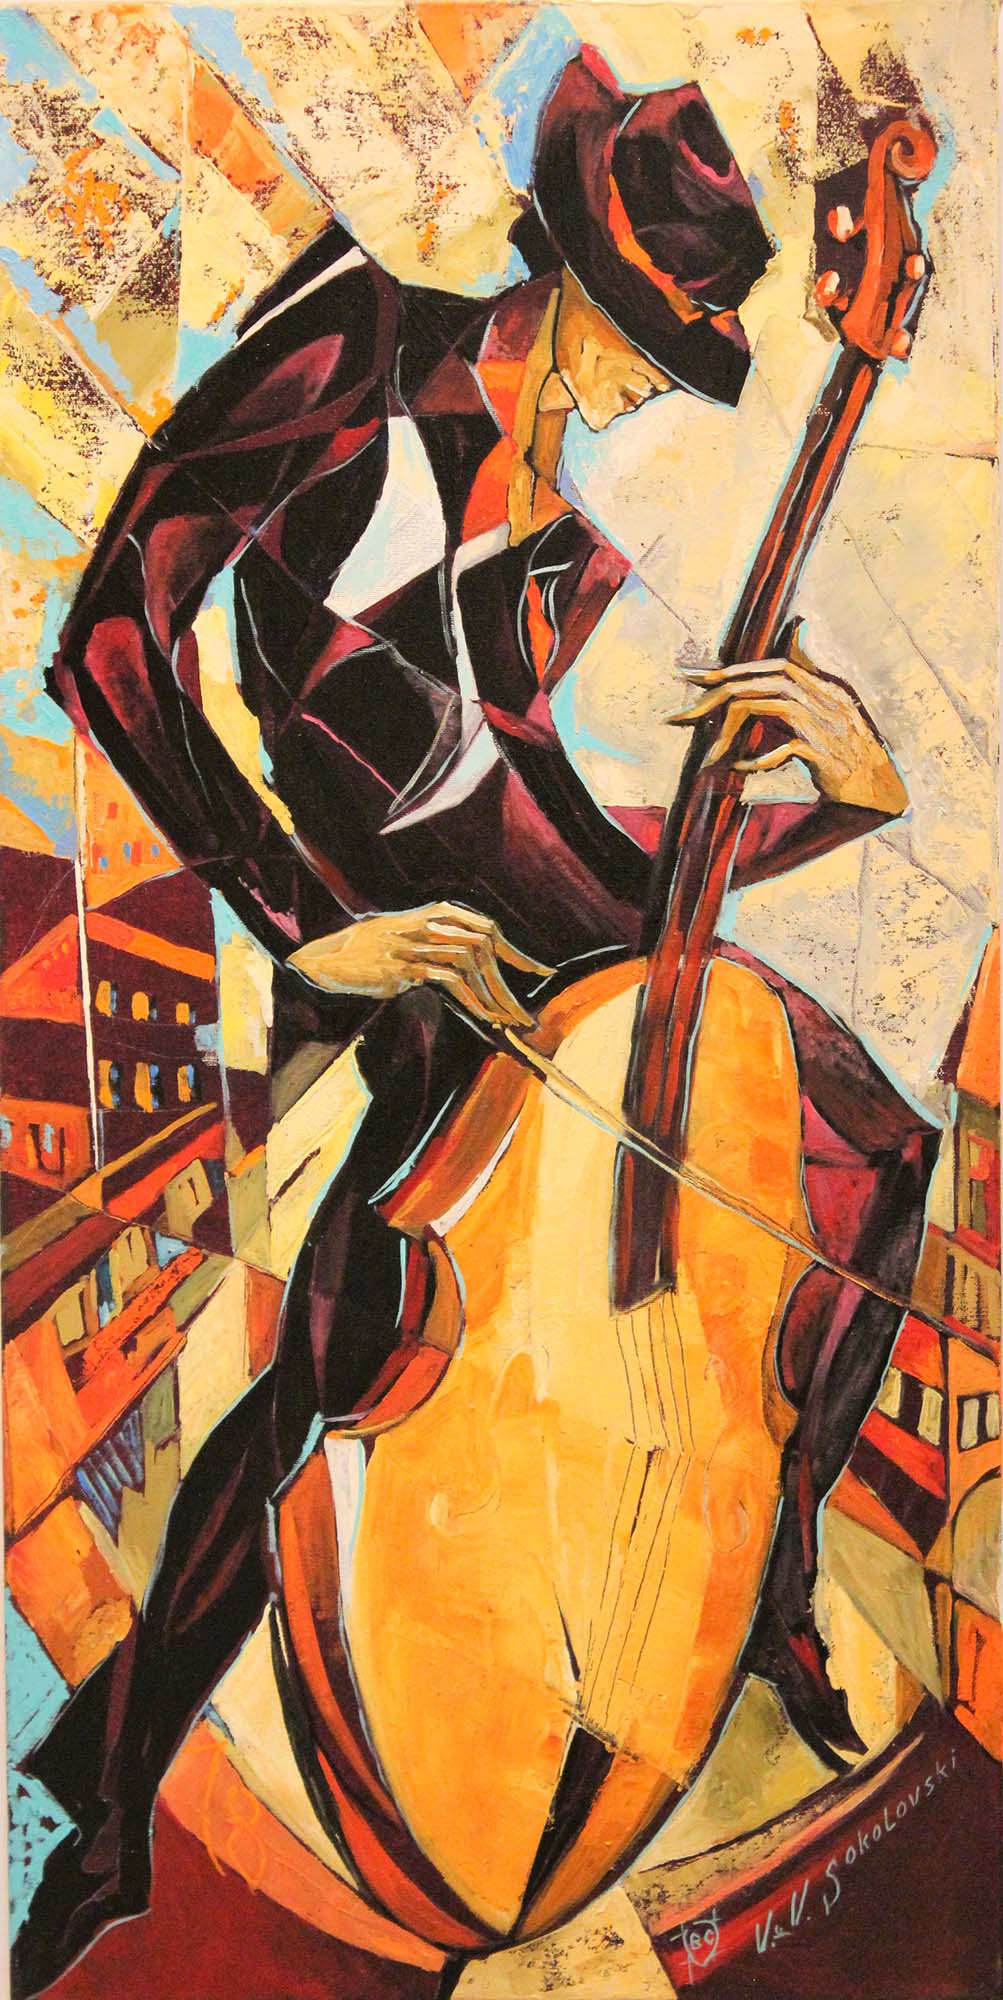 Cubism Painting. Title: Cello On The Roof, Original Oil 36x18 inches by Contemporary Canadian artist Valeri Sokolovski.